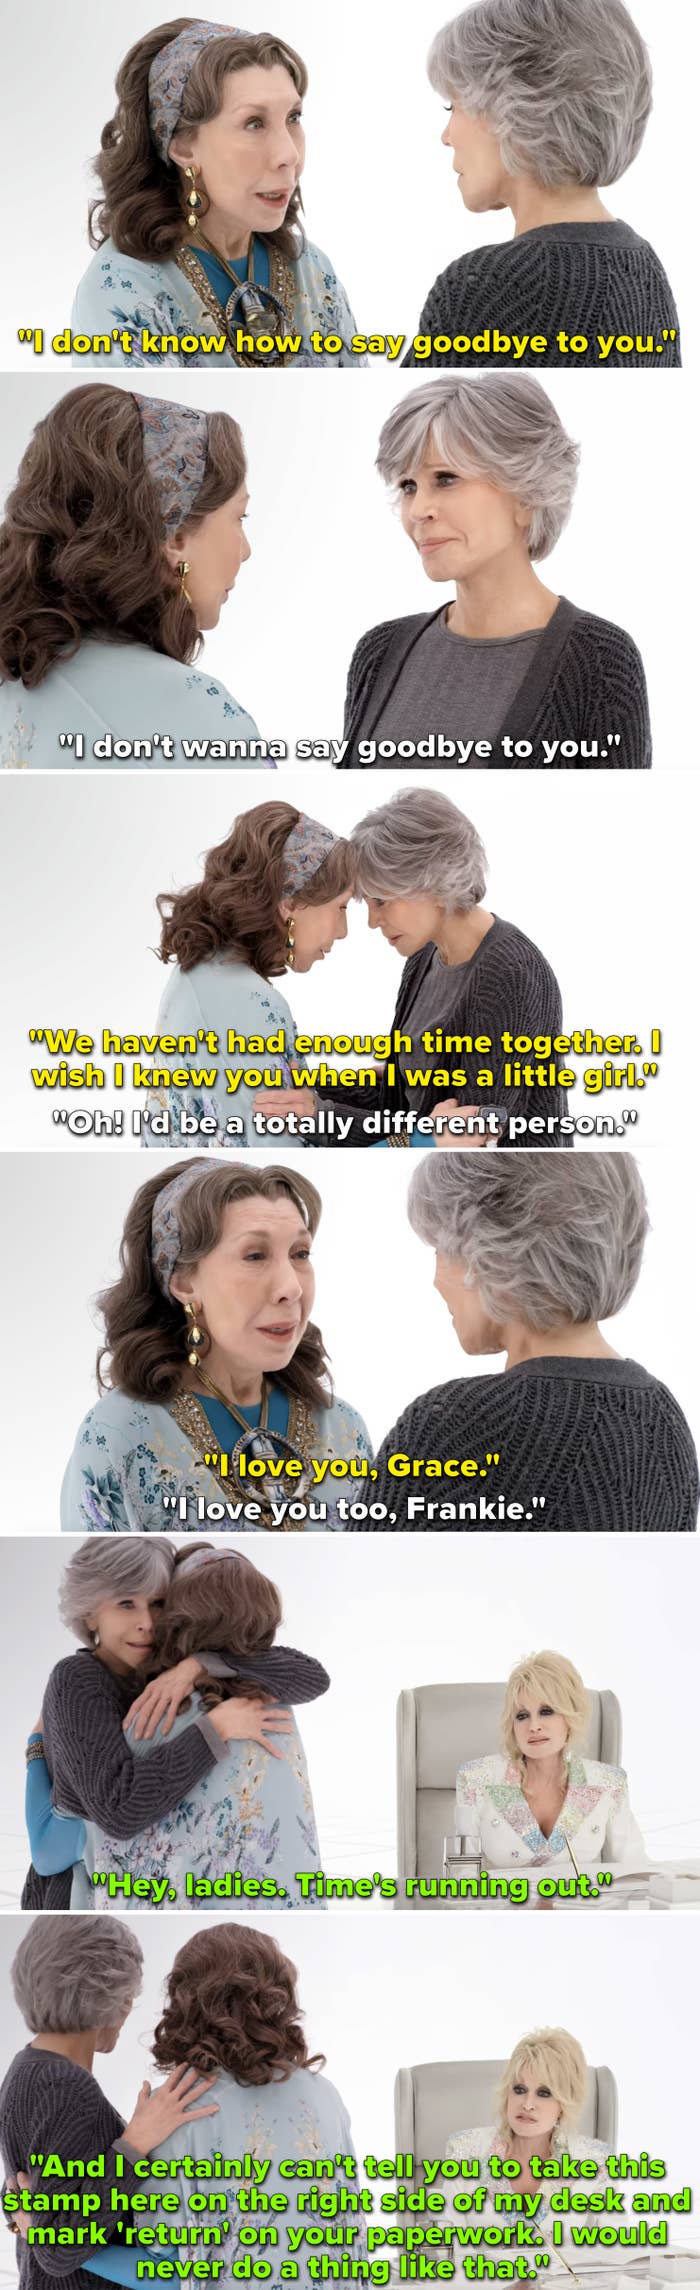 Grace and Frankie saying bye to each other and an angel telling them their time is running out